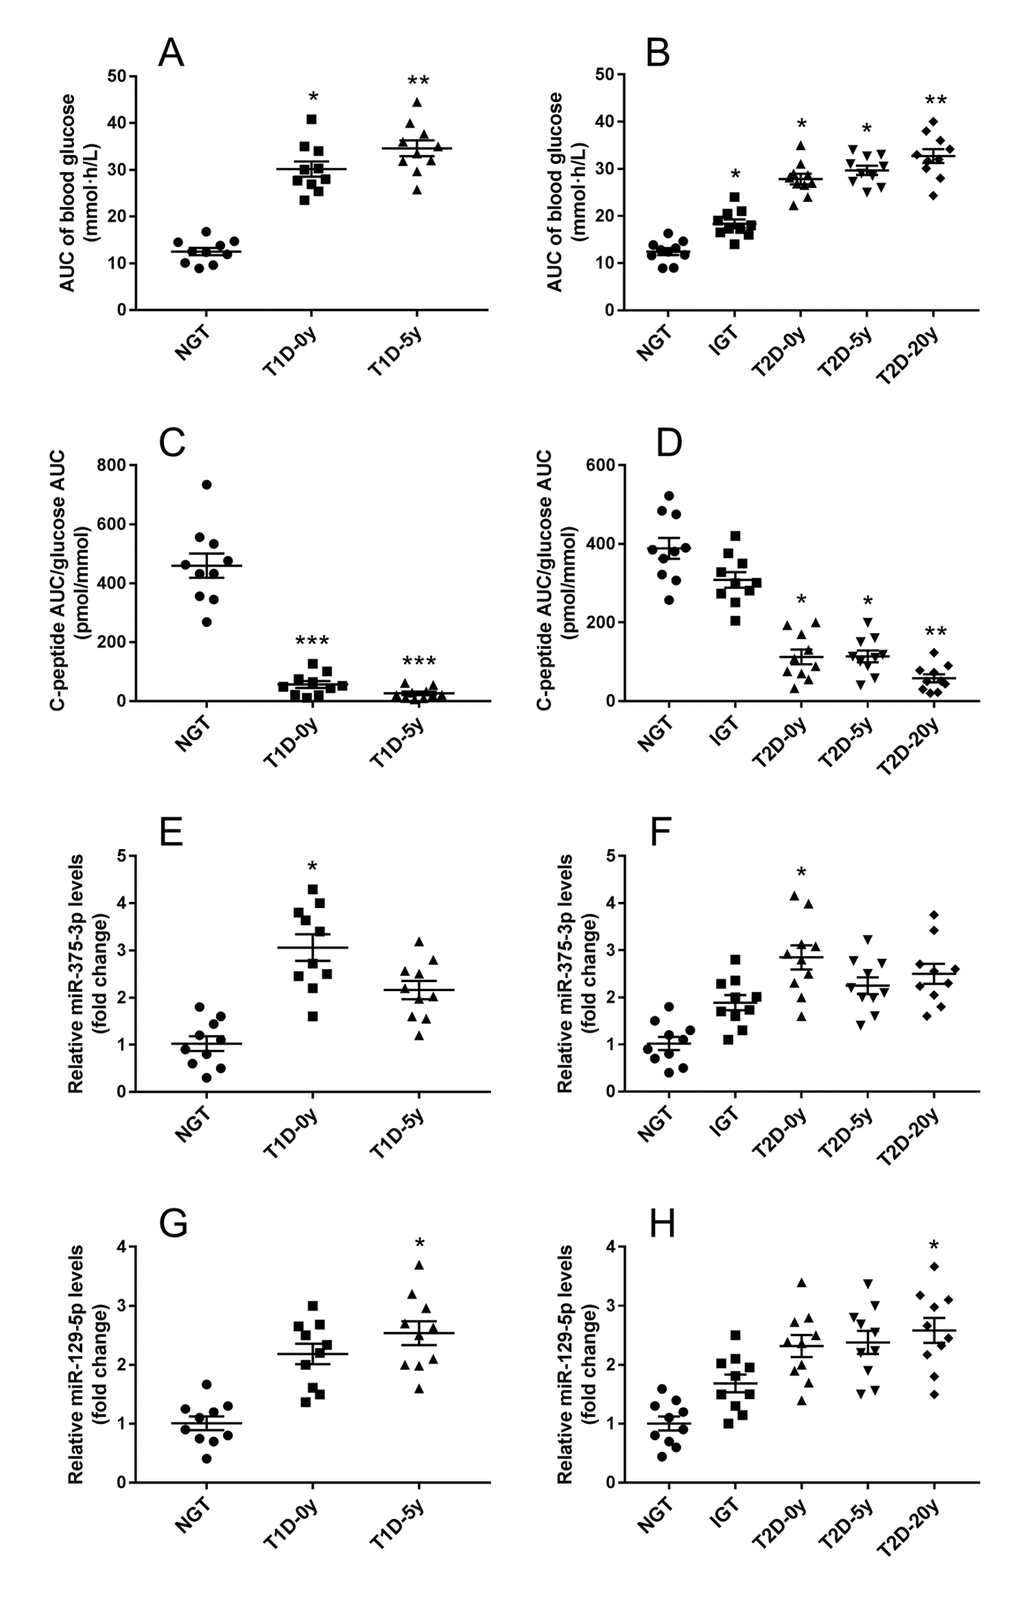 Serum exosomal miRNA-375 and miRNA-129 expression in T1DM and T2DM patients with different β cell function. After standard mixed meal tolerance tests, the area under curve (AUC) of plasma glucose were measured (A), and the ratio of C-peptide AUC to glucose AUC were calculated to evaluate islet β cell function (B). Serum exosomal miRNA-375 (E, F) and miRNA-129 (G, H) expression in T1DM and T2DM patients with diverse diabetes course were detected by qRT-PCR. All measurements are mean ± SEM (n≥10 subjects of each group) (* PPP